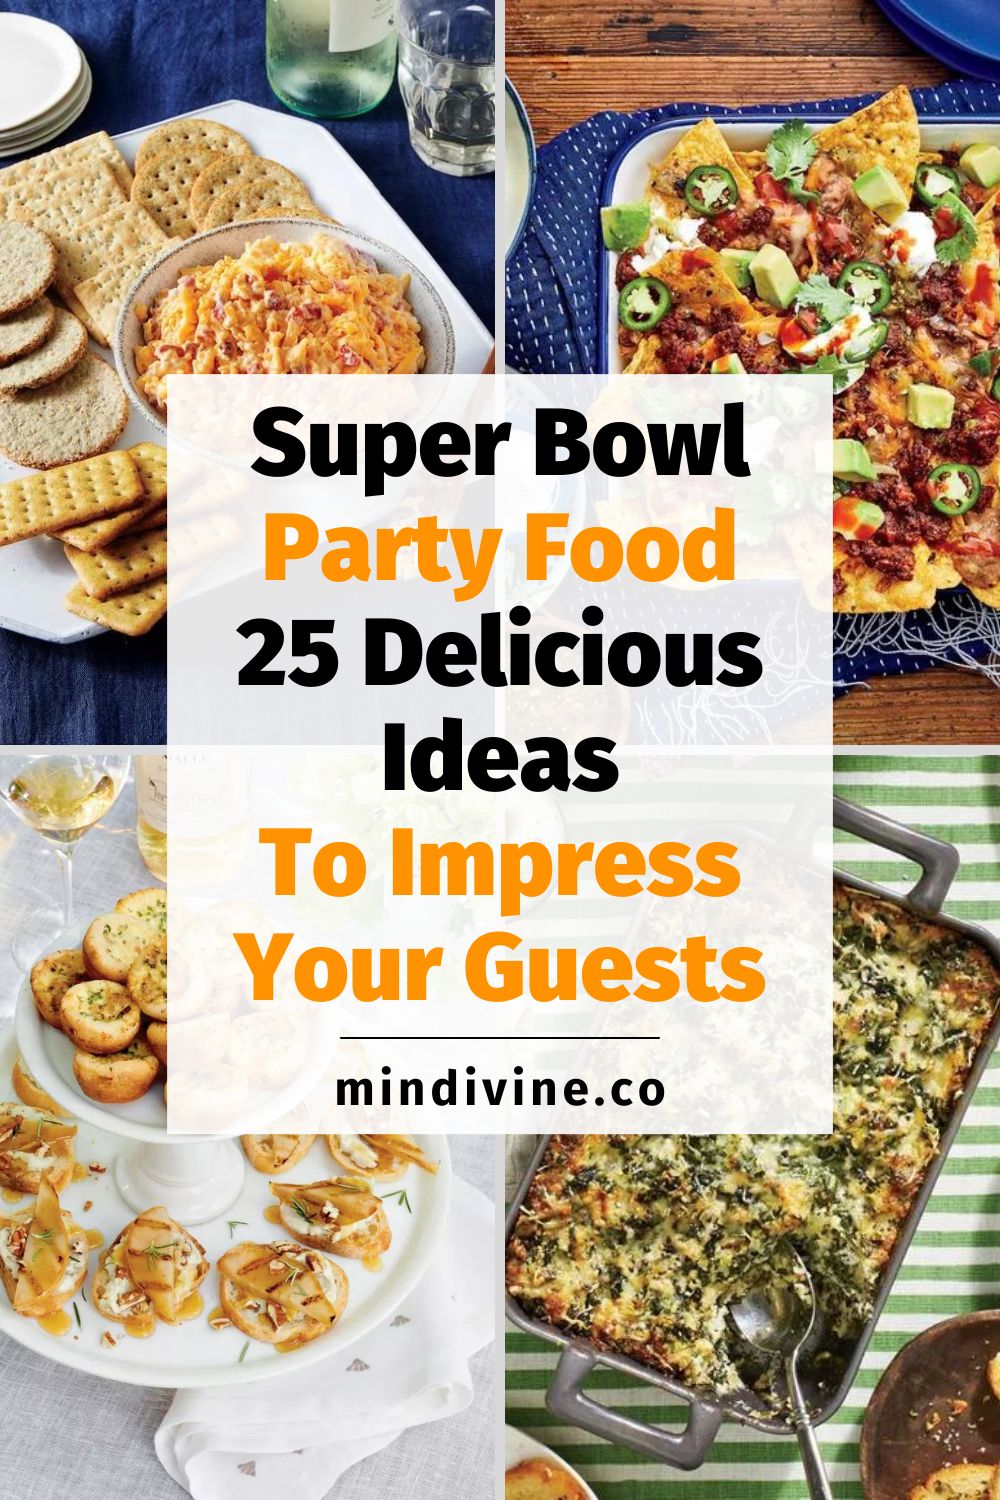 Super Bowl Party Food: Appetizers And Snacks